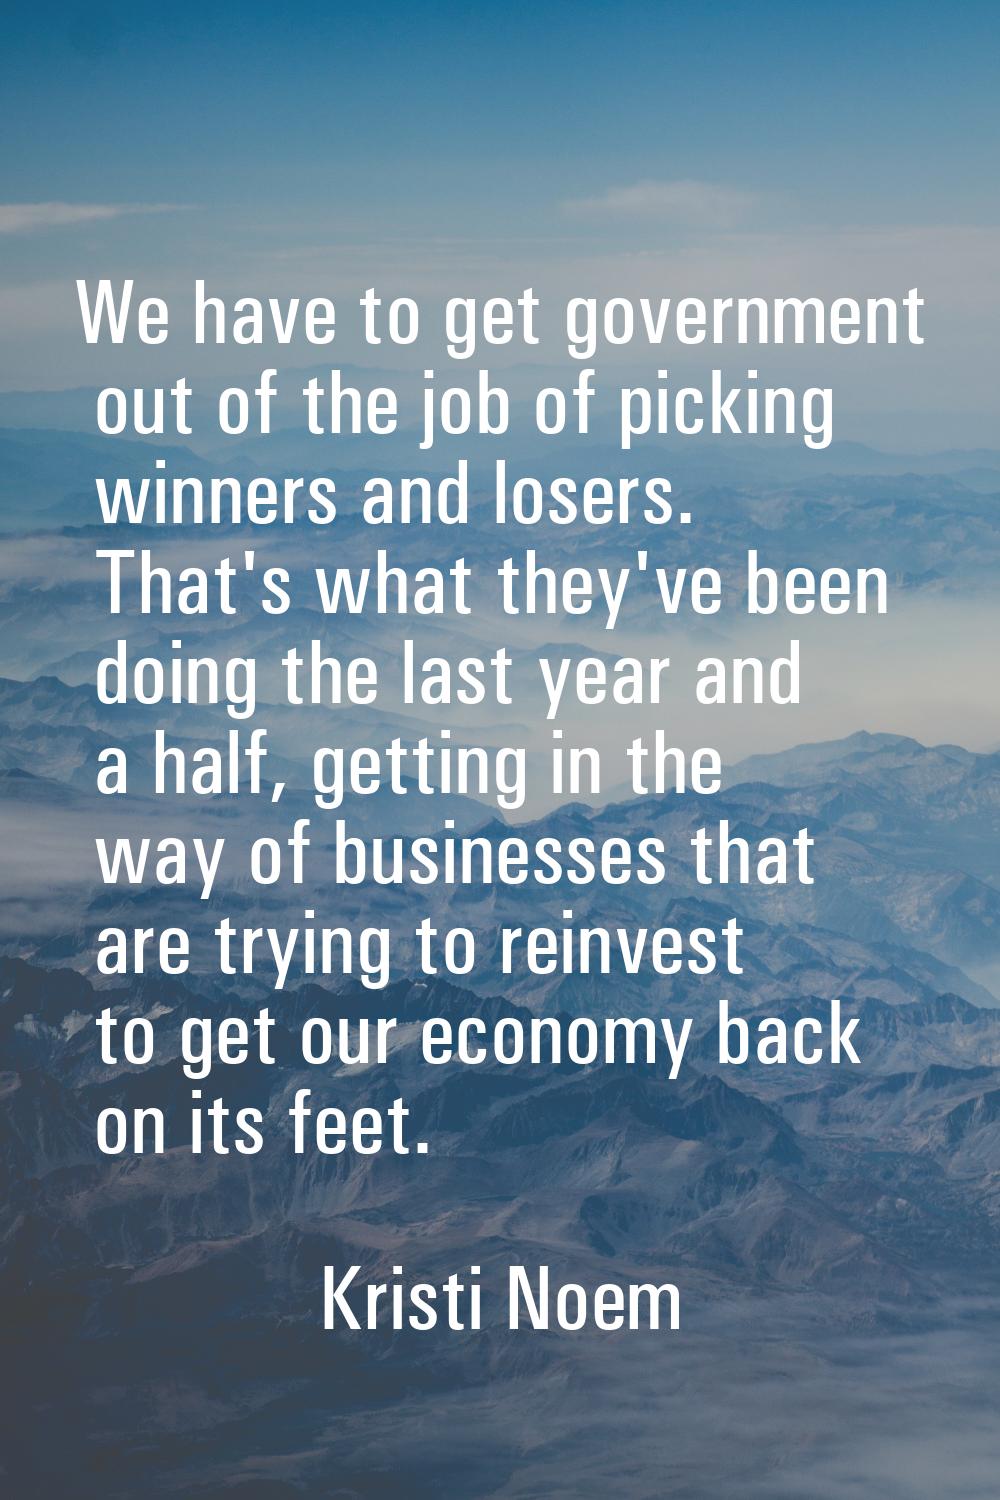 We have to get government out of the job of picking winners and losers. That's what they've been do